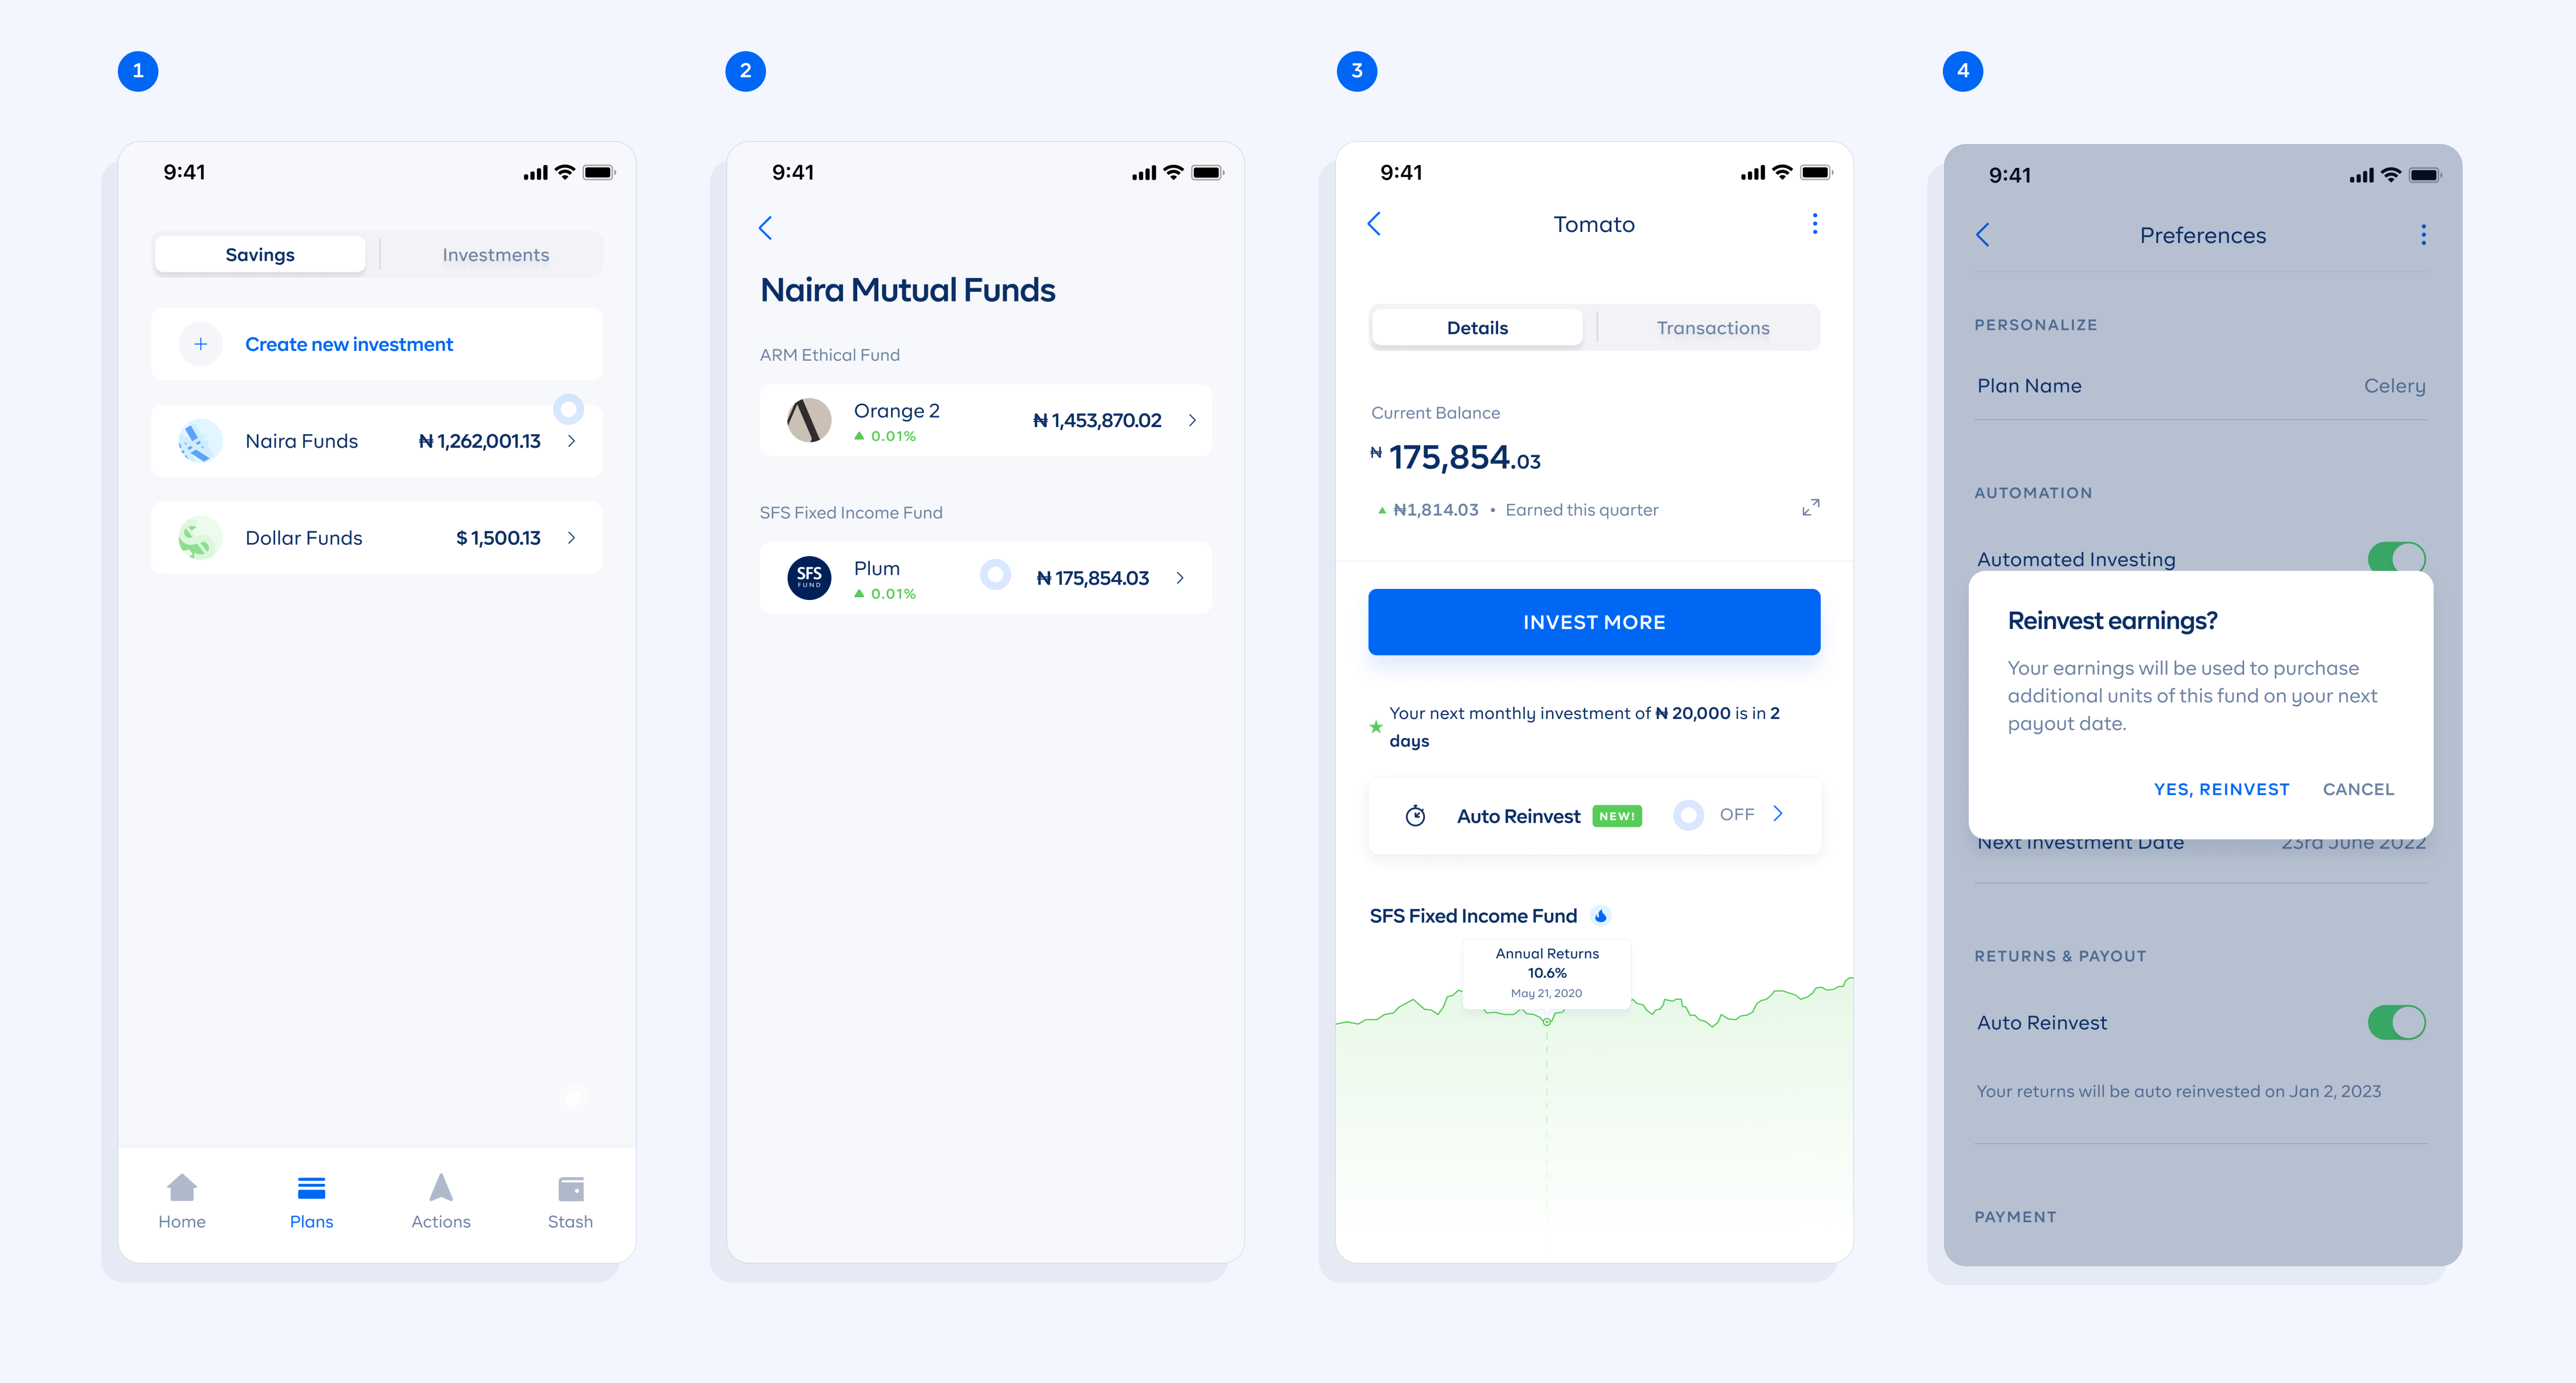 Auto Reinvest on Cowrywise